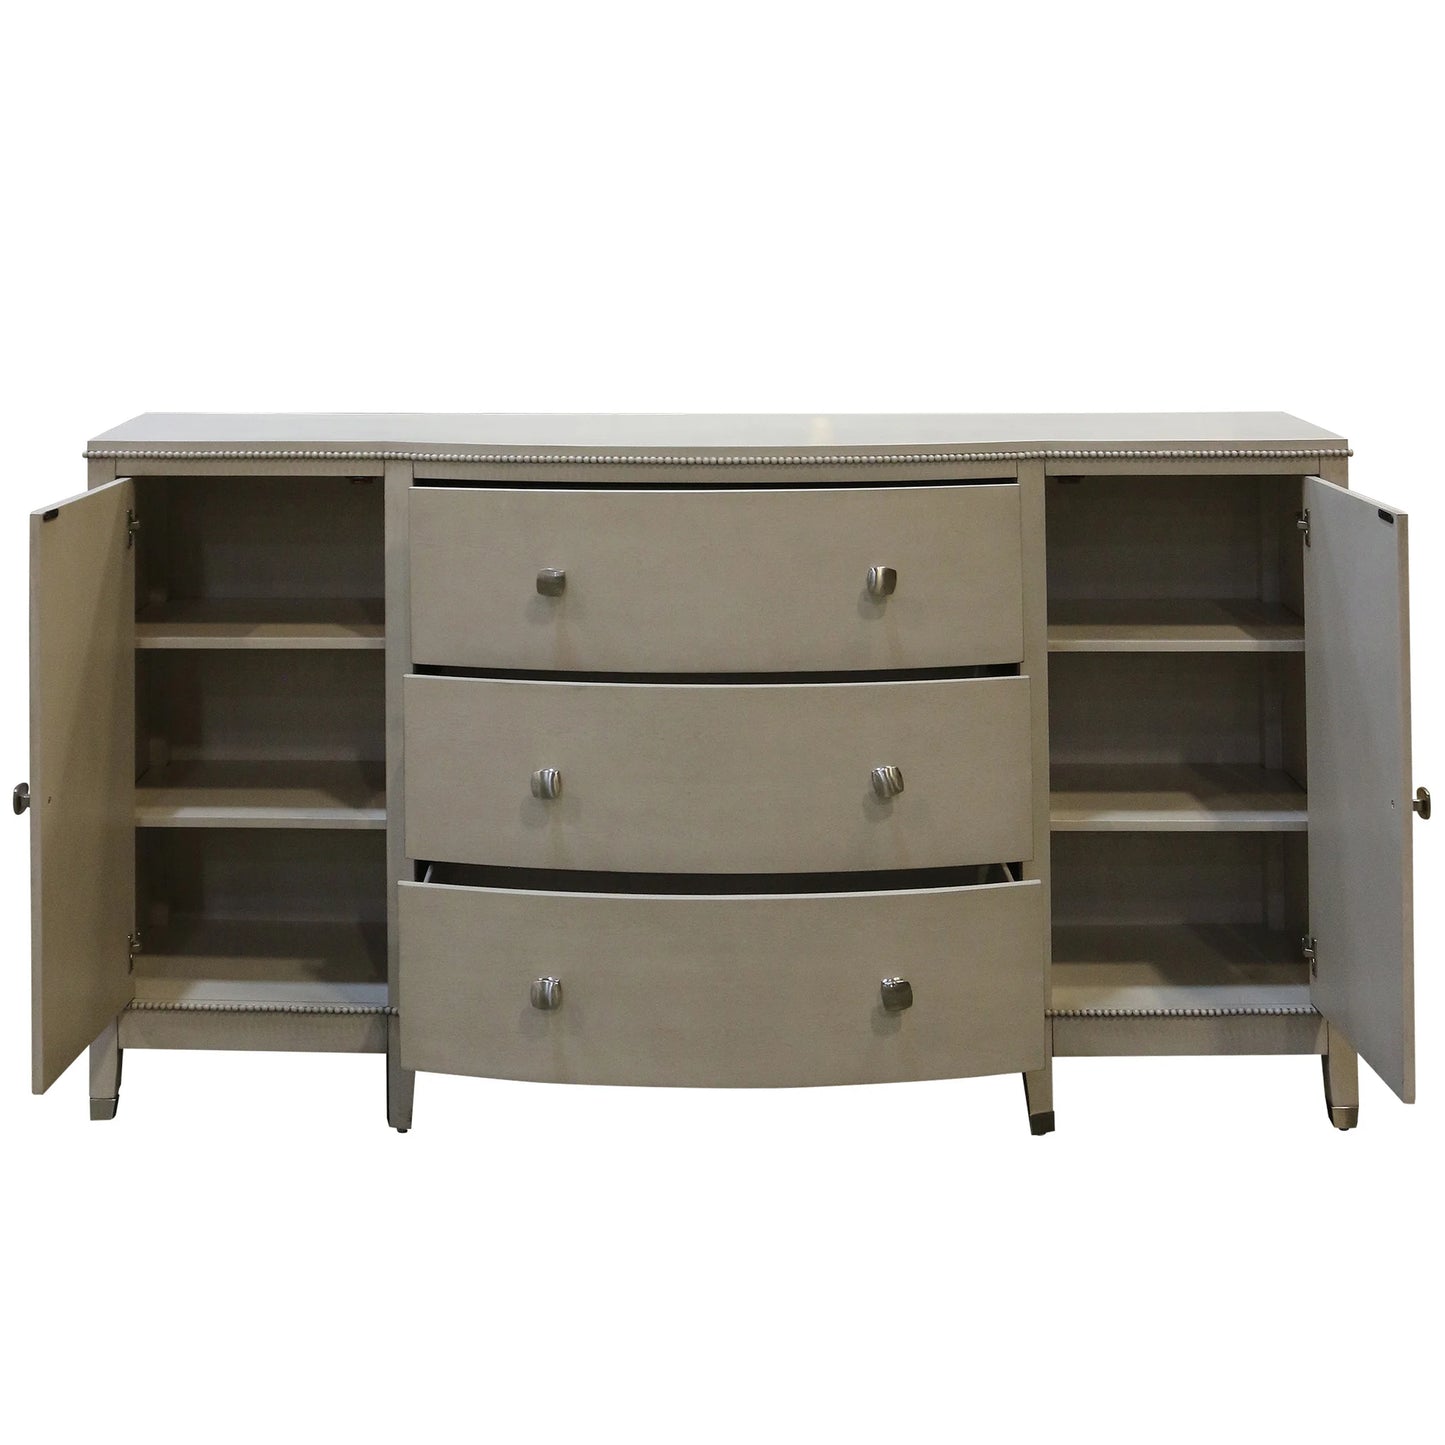 SMOKE GRAY Three Drawer Chest with Two Side Cabinets